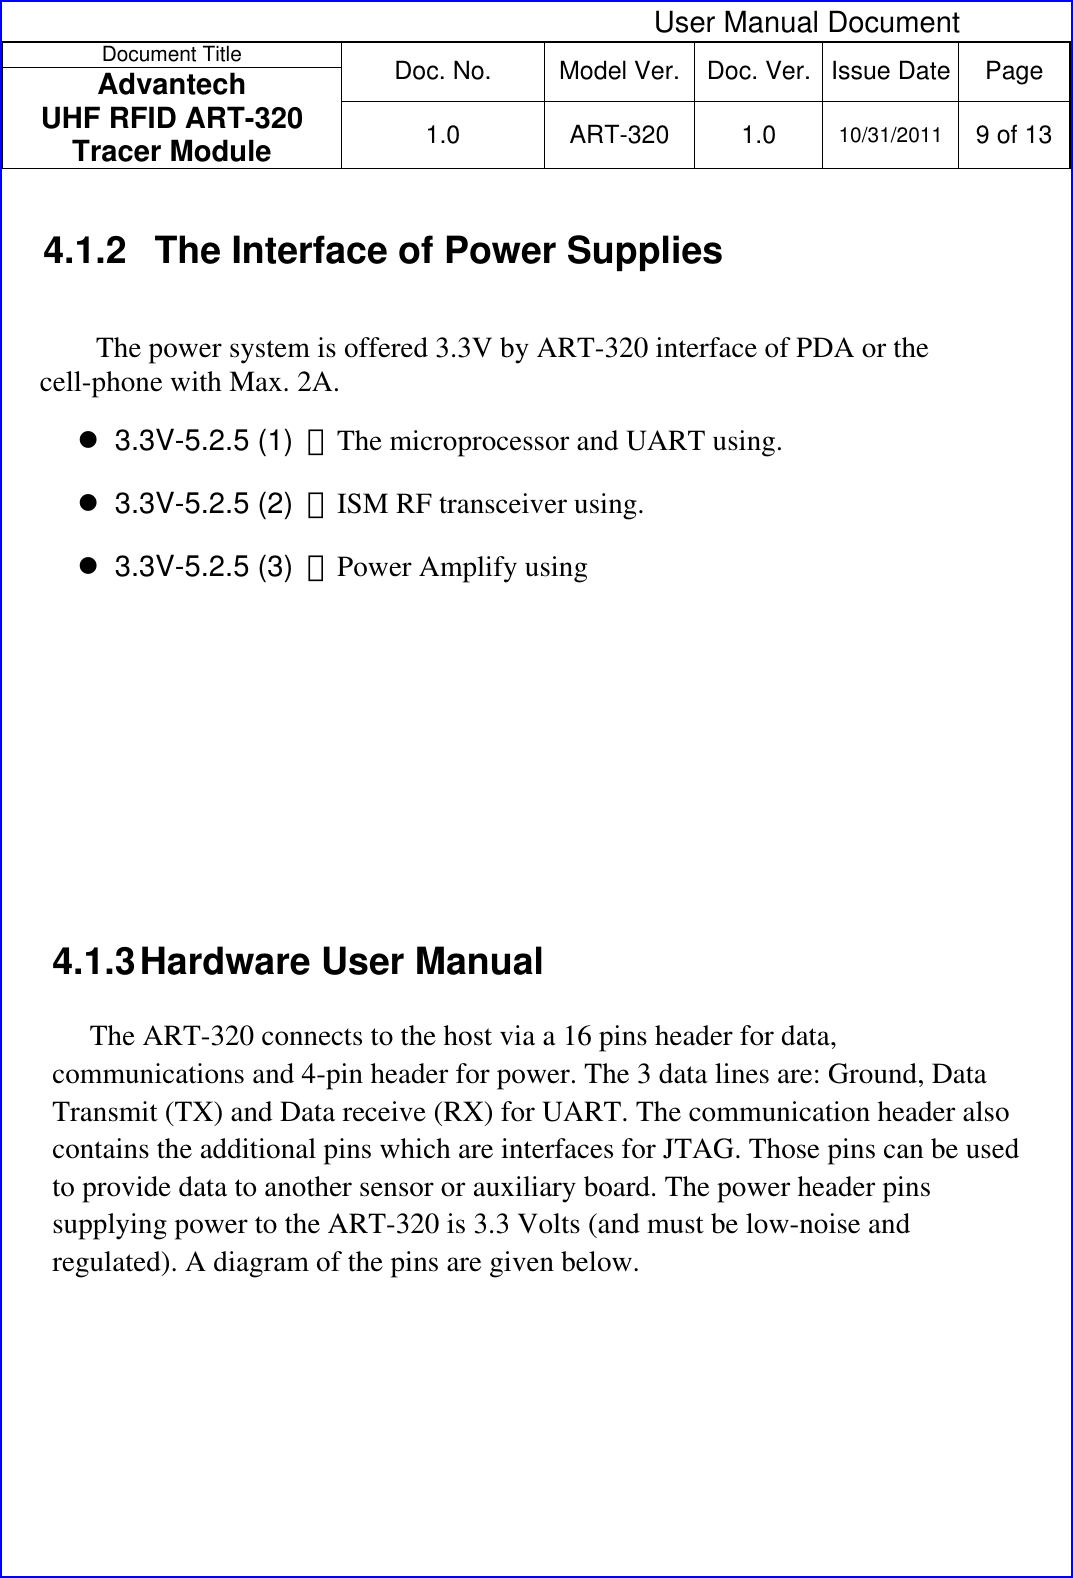  User Manual Document Document Title  Doc. No.  Model Ver. Doc. Ver.  Issue Date Page Advantech  UHF RFID ART-320 Tracer Module  1.0 ART-320 1.0 10/31/2011 9 of 13  4.1.2  The Interface of Power Supplies The power system is offered 3.3V by ART-320 interface of PDA or the cell-phone with Max. 2A.  3.3V-5.2.5 (1)  ：The microprocessor and UART using.   3.3V-5.2.5 (2)  ：ISM RF transceiver using.  3.3V-5.2.5 (3)  ：Power Amplify using      4.1.3 Hardware User Manual  The ART-320 connects to the host via a 16 pins header for data, communications and 4-pin header for power. The 3 data lines are: Ground, Data Transmit (TX) and Data receive (RX) for UART. The communication header also contains the additional pins which are interfaces for JTAG. Those pins can be used to provide data to another sensor or auxiliary board. The power header pins supplying power to the ART-320 is 3.3 Volts (and must be low-noise and regulated). A diagram of the pins are given below.  